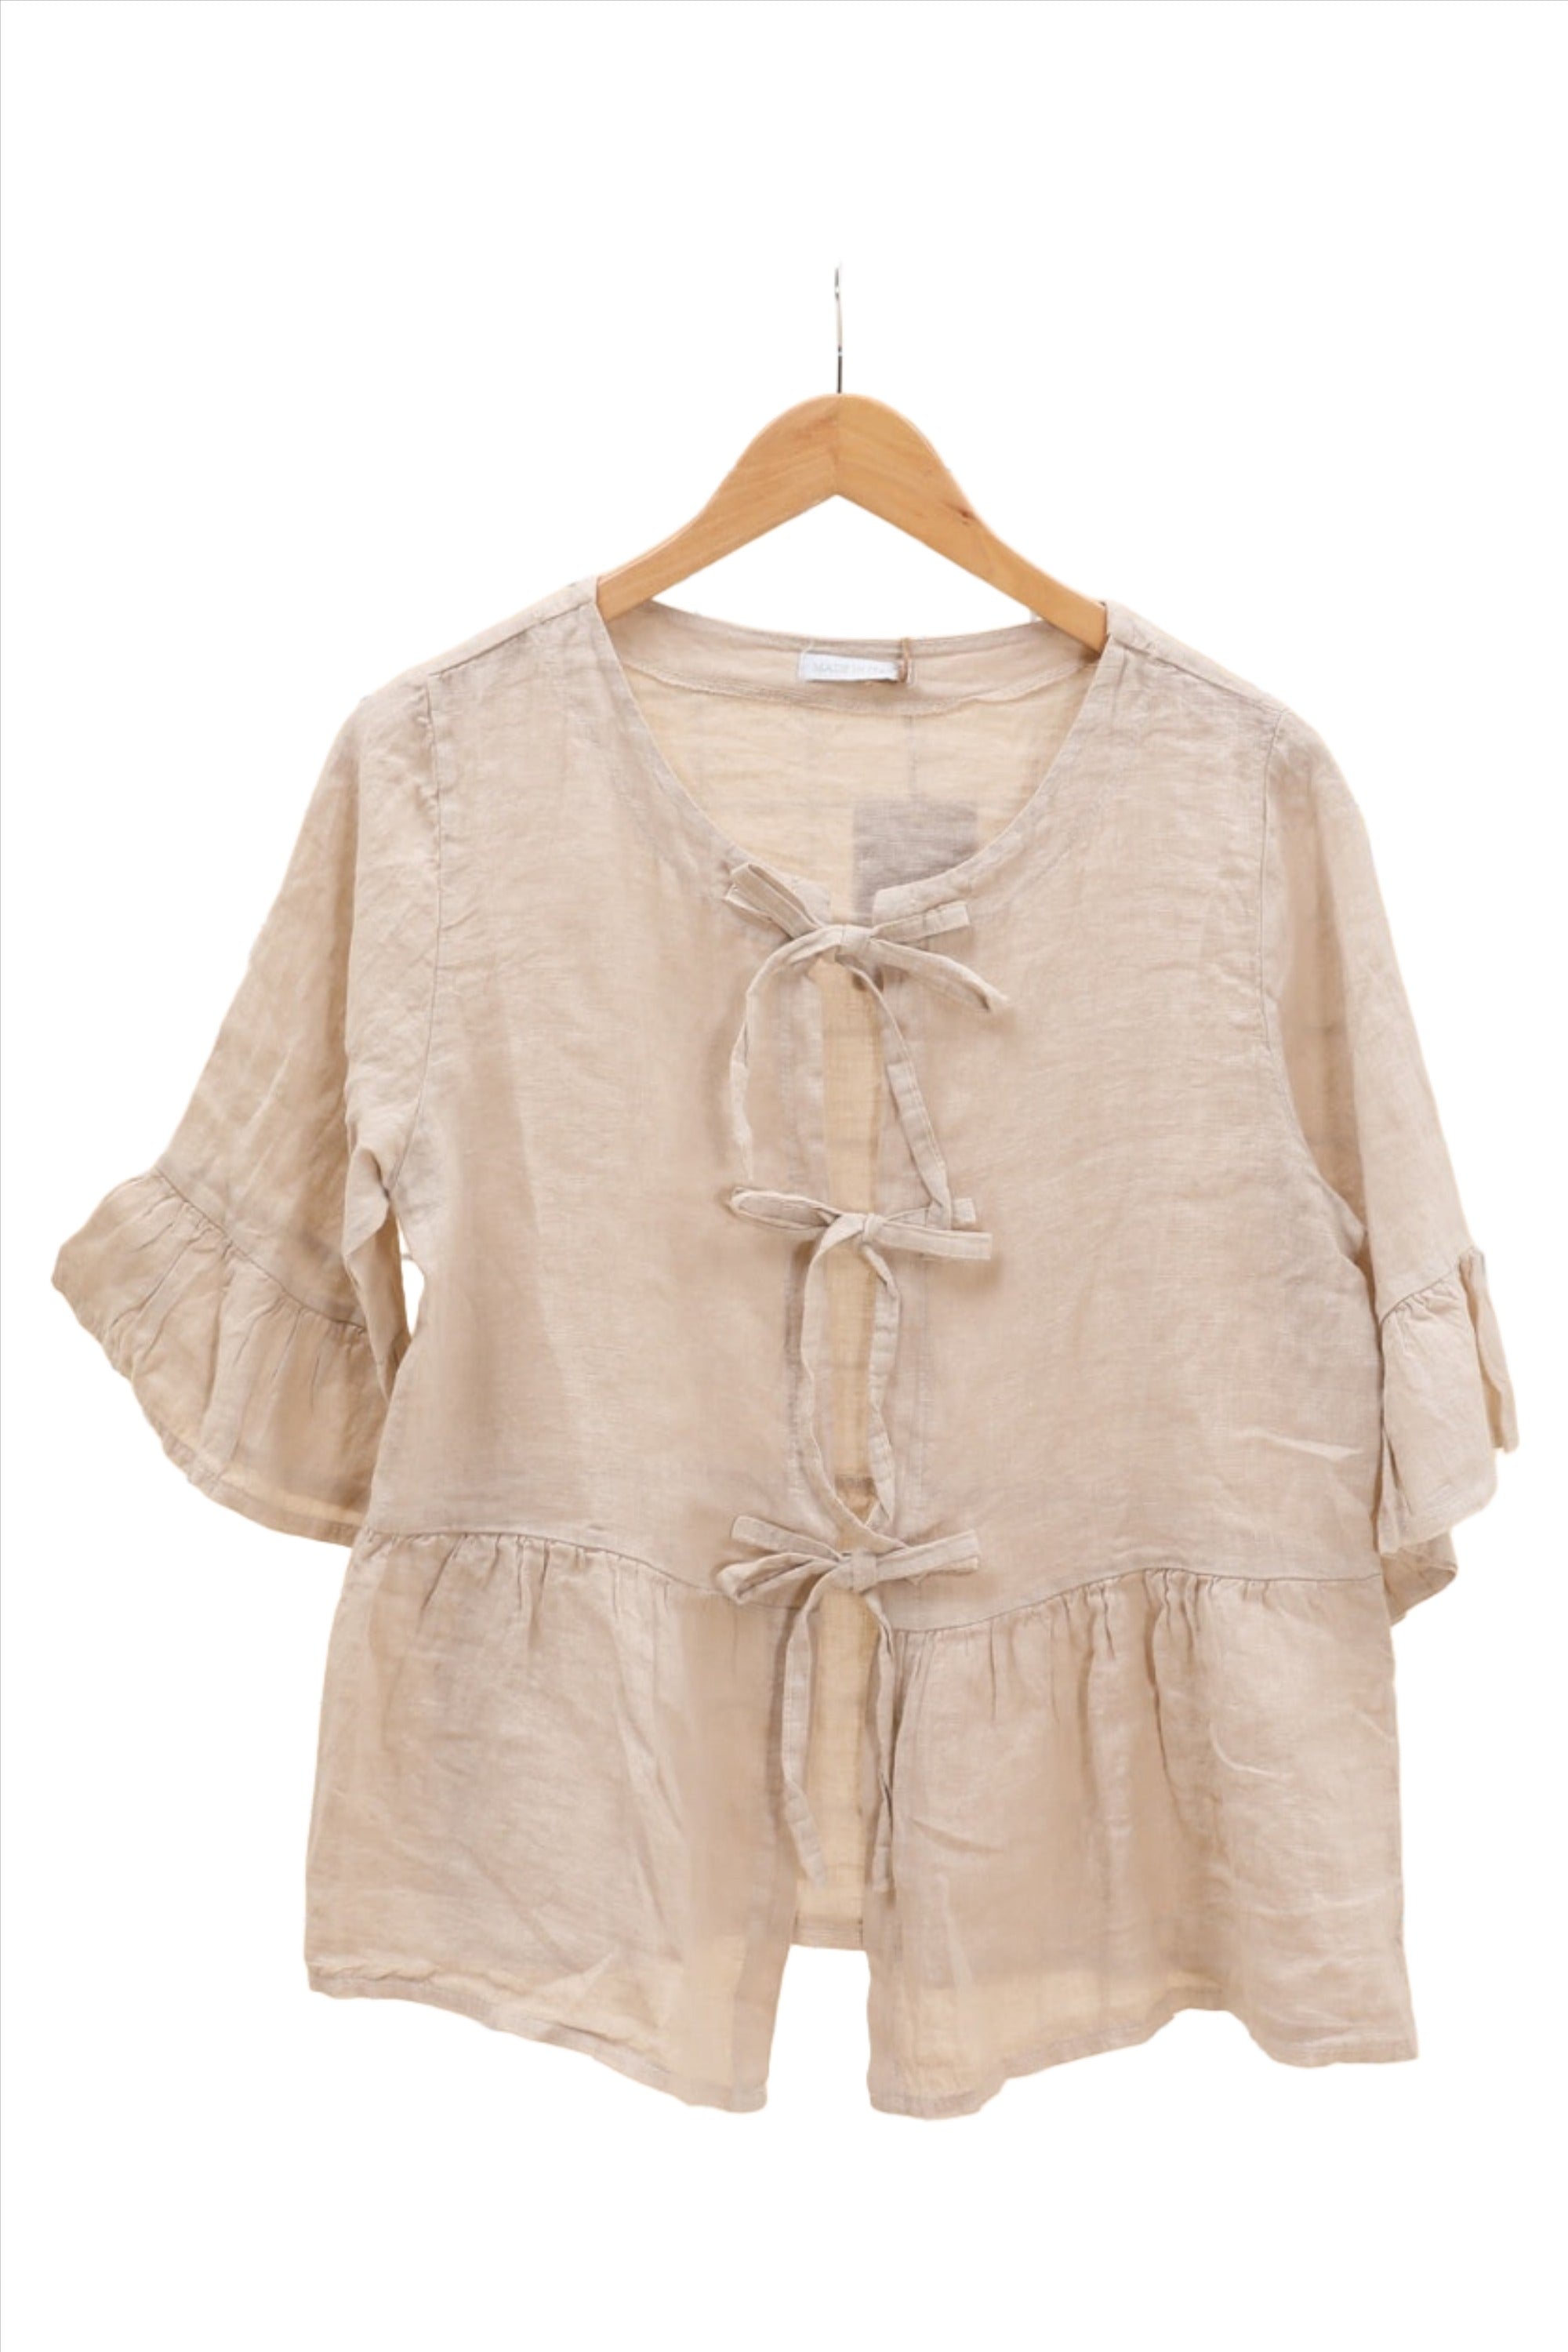 Clever Alice Tie up Bow Linen Overshirt 